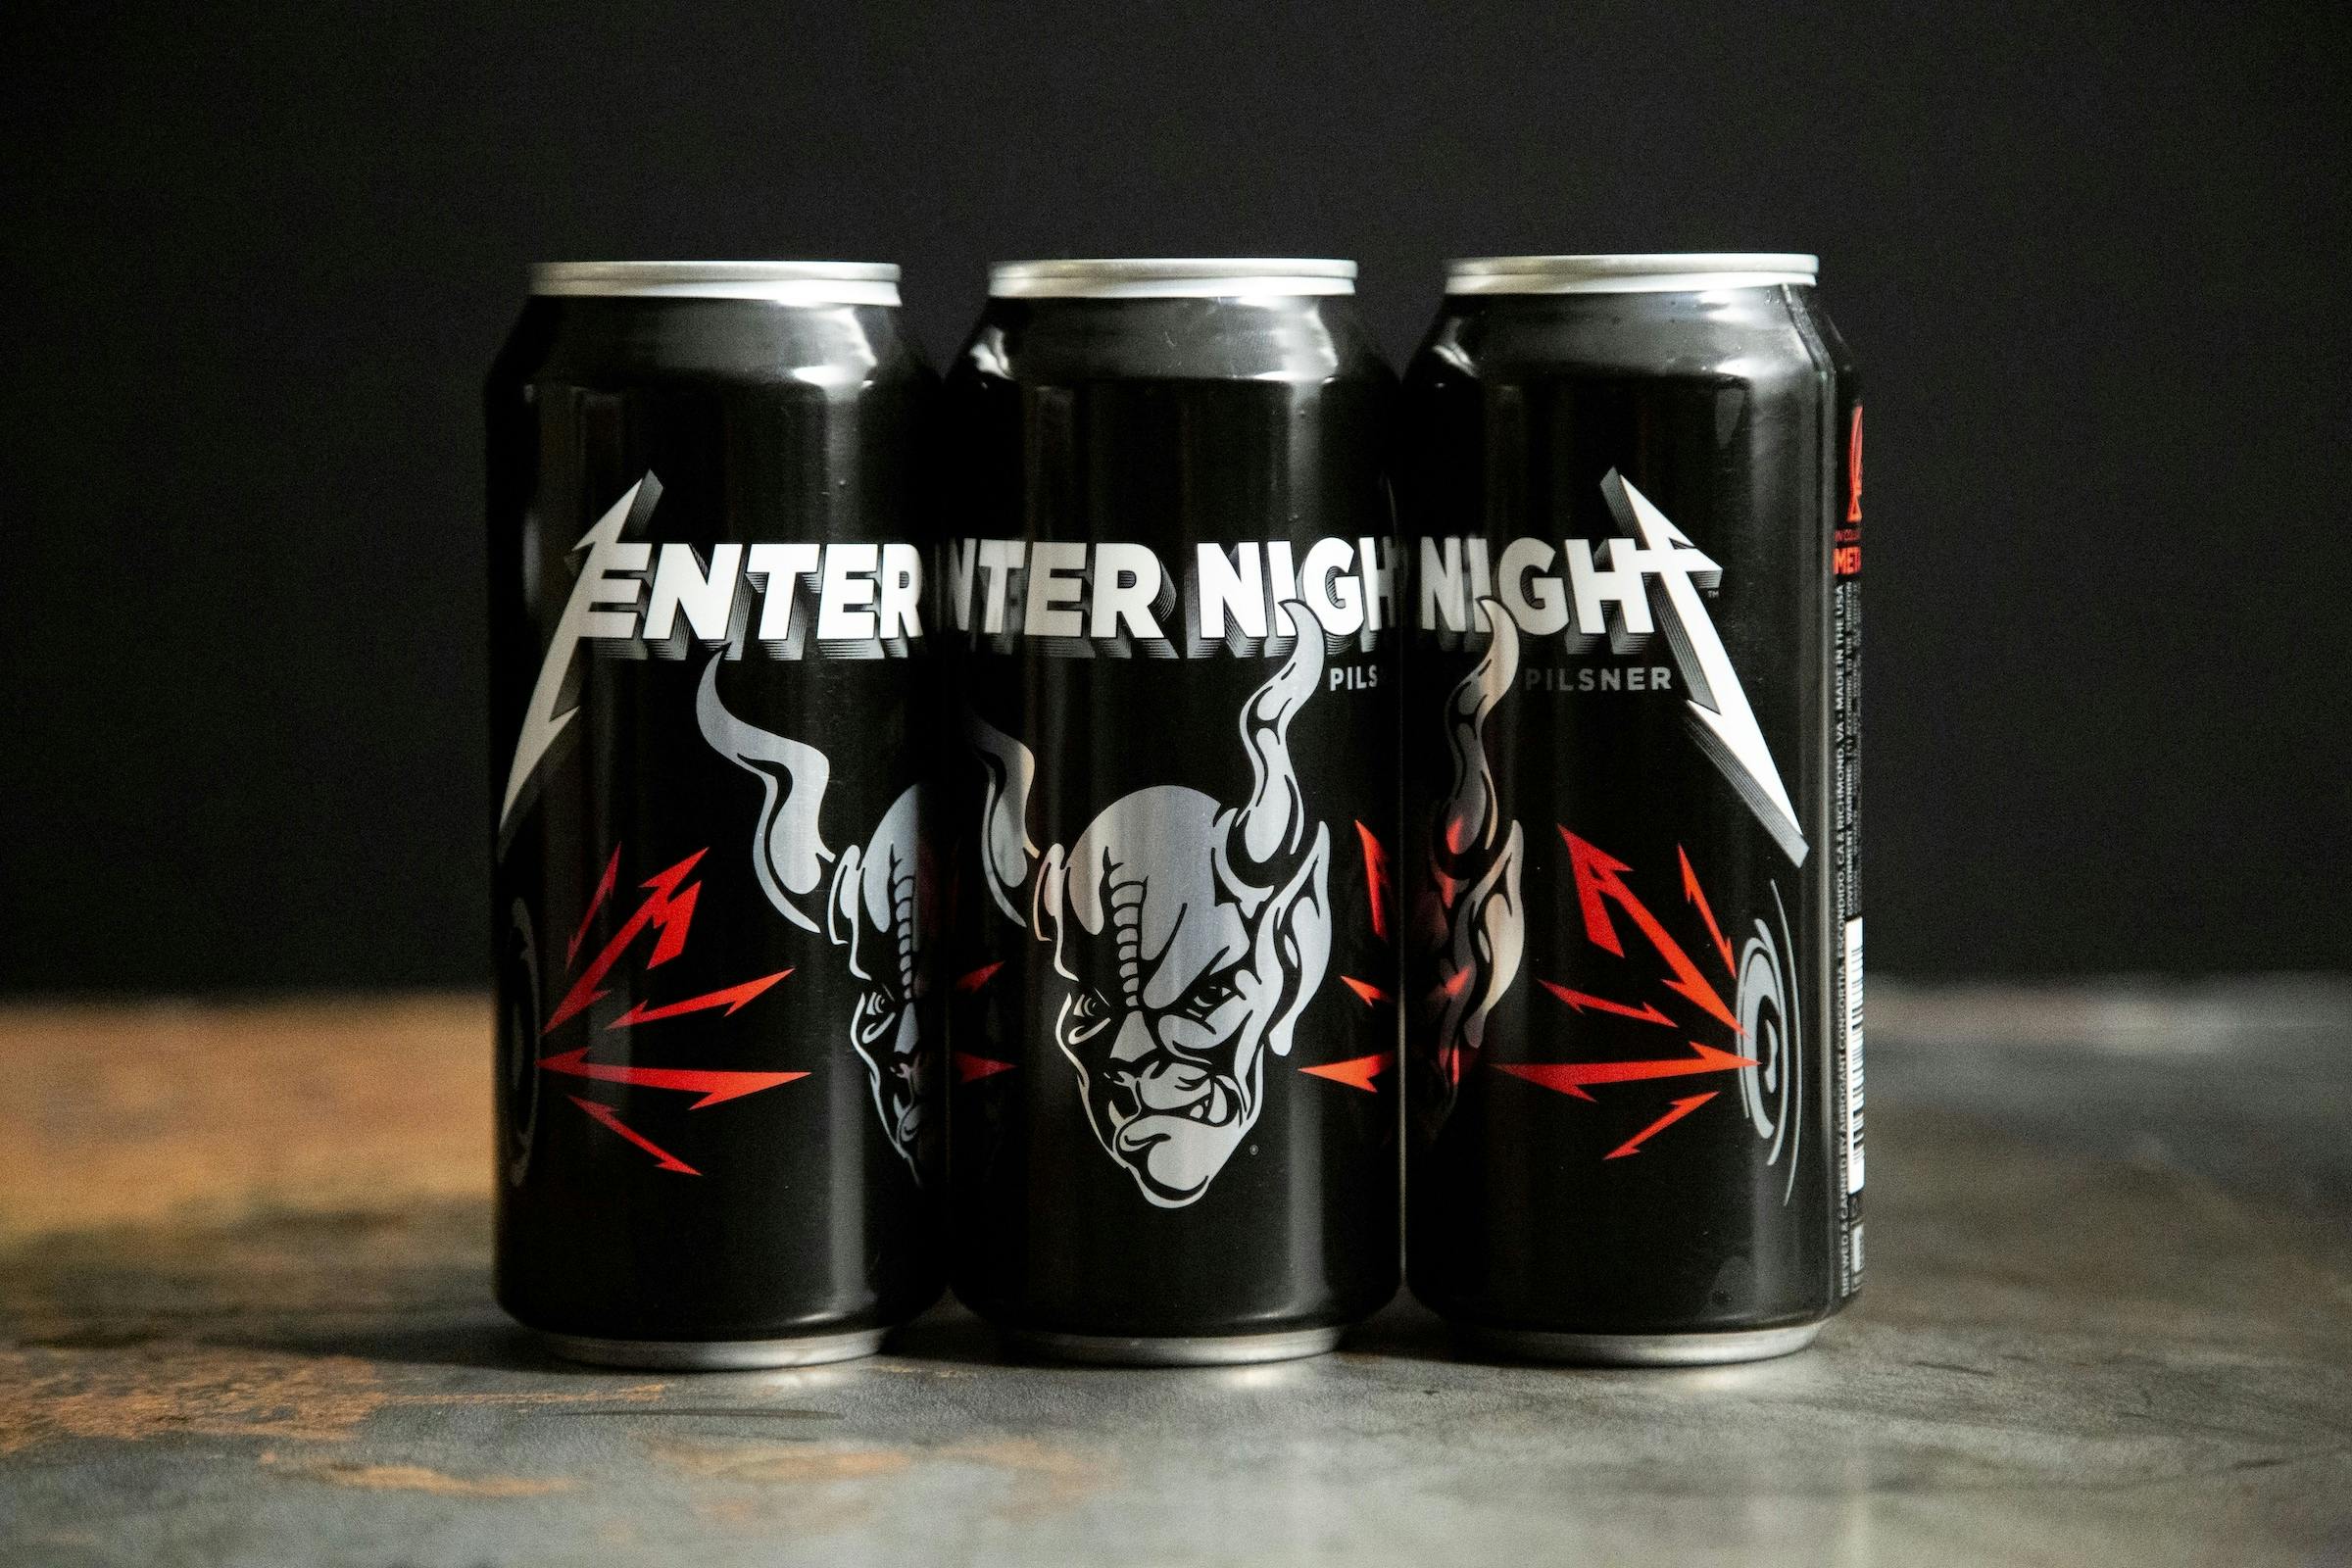 Metallica Release Mini-Documentary About Their New Beer